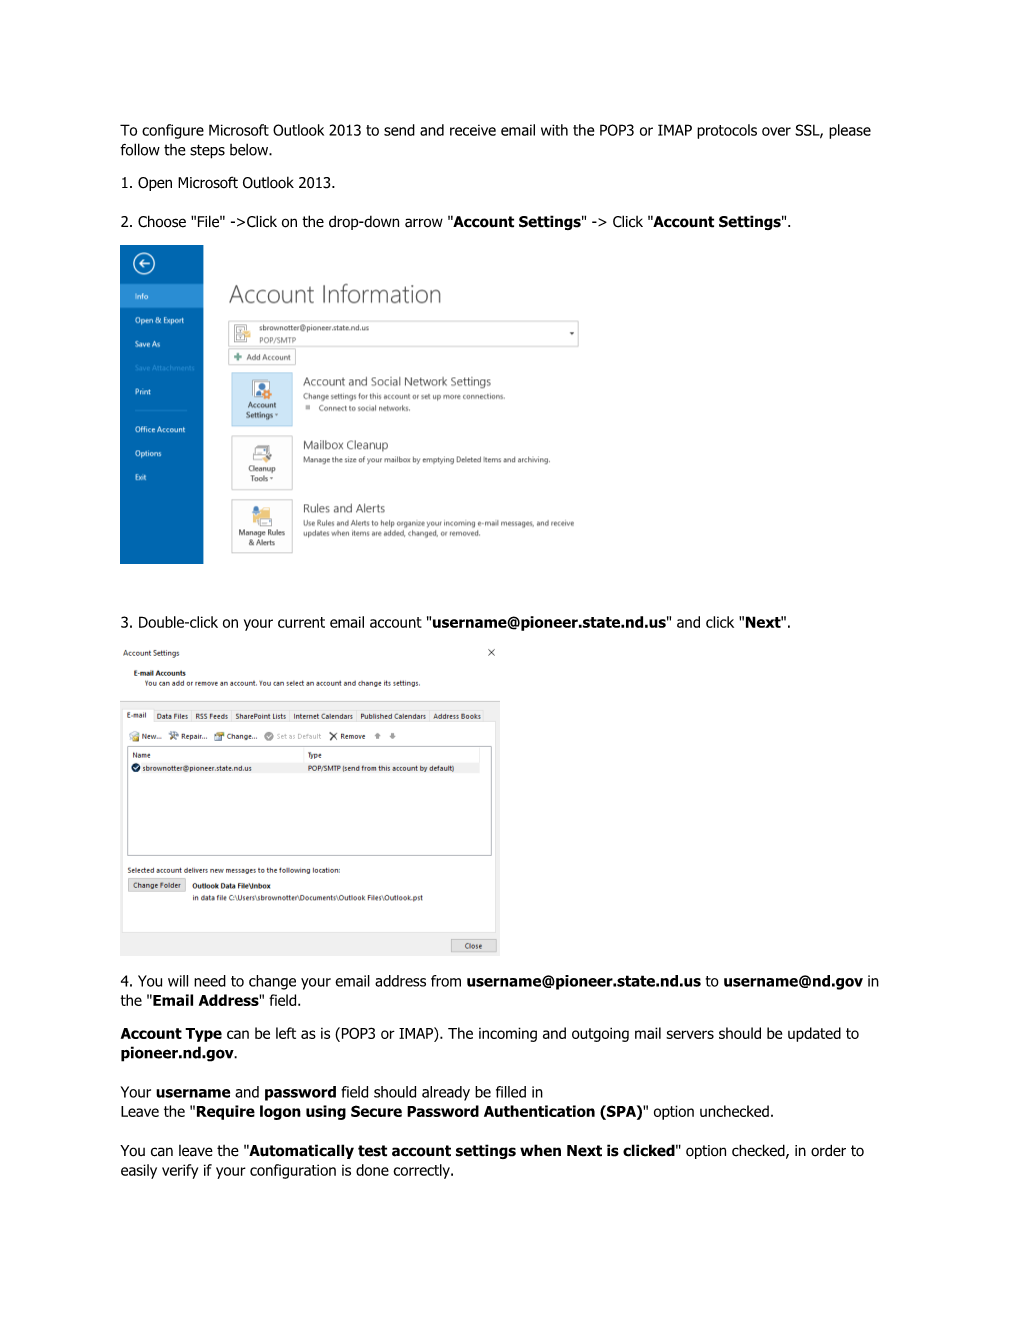 To Configure Microsoft Outlook 2013 to Send and Receive Email with the POP3 Or IMAP Protocols Over SSL, Please Follow the Steps Below